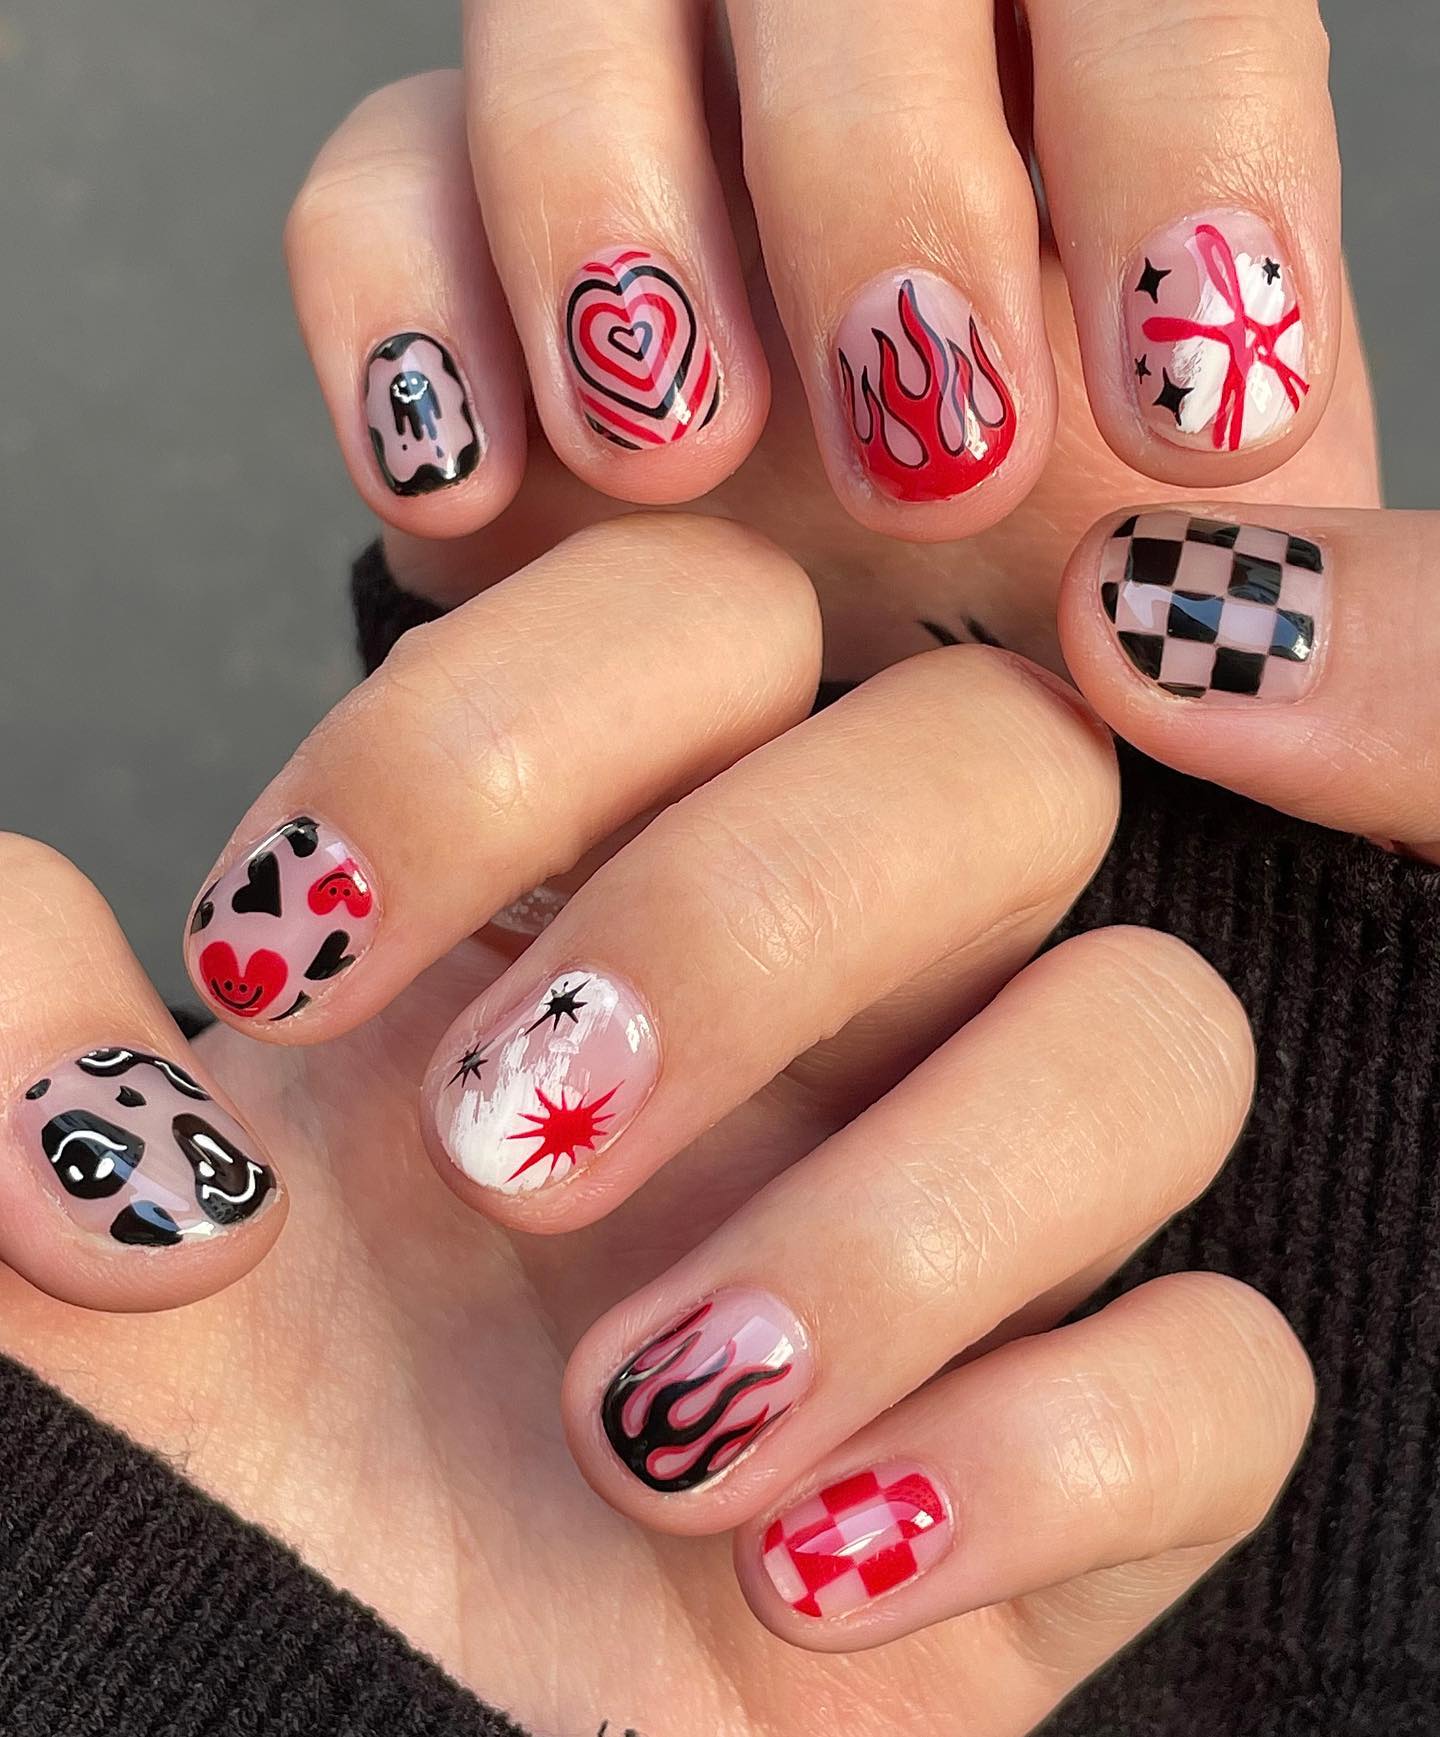 Why don't you apply different and sweet nail art to your each nail? A smiley face and heart smileys are ready to cheer you up while a fire and checkered nail art give an extra beauty to the nails.